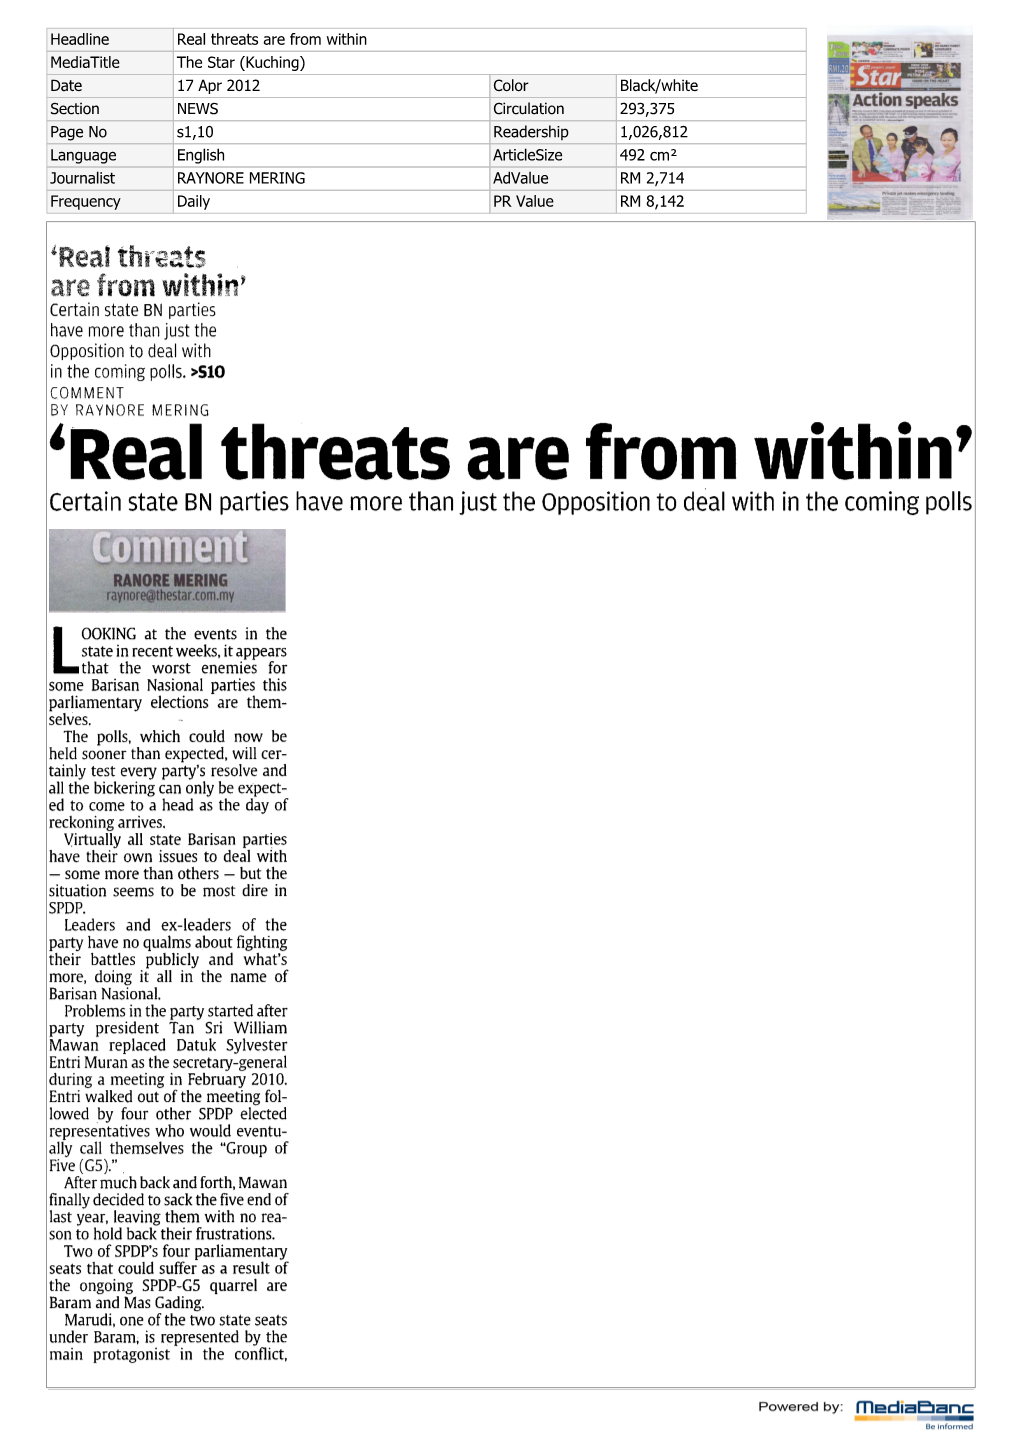 'Real Threats Are from Within' Certain State BN Parties Have More Than Just the Opposition to Deal with in the Coming Polls